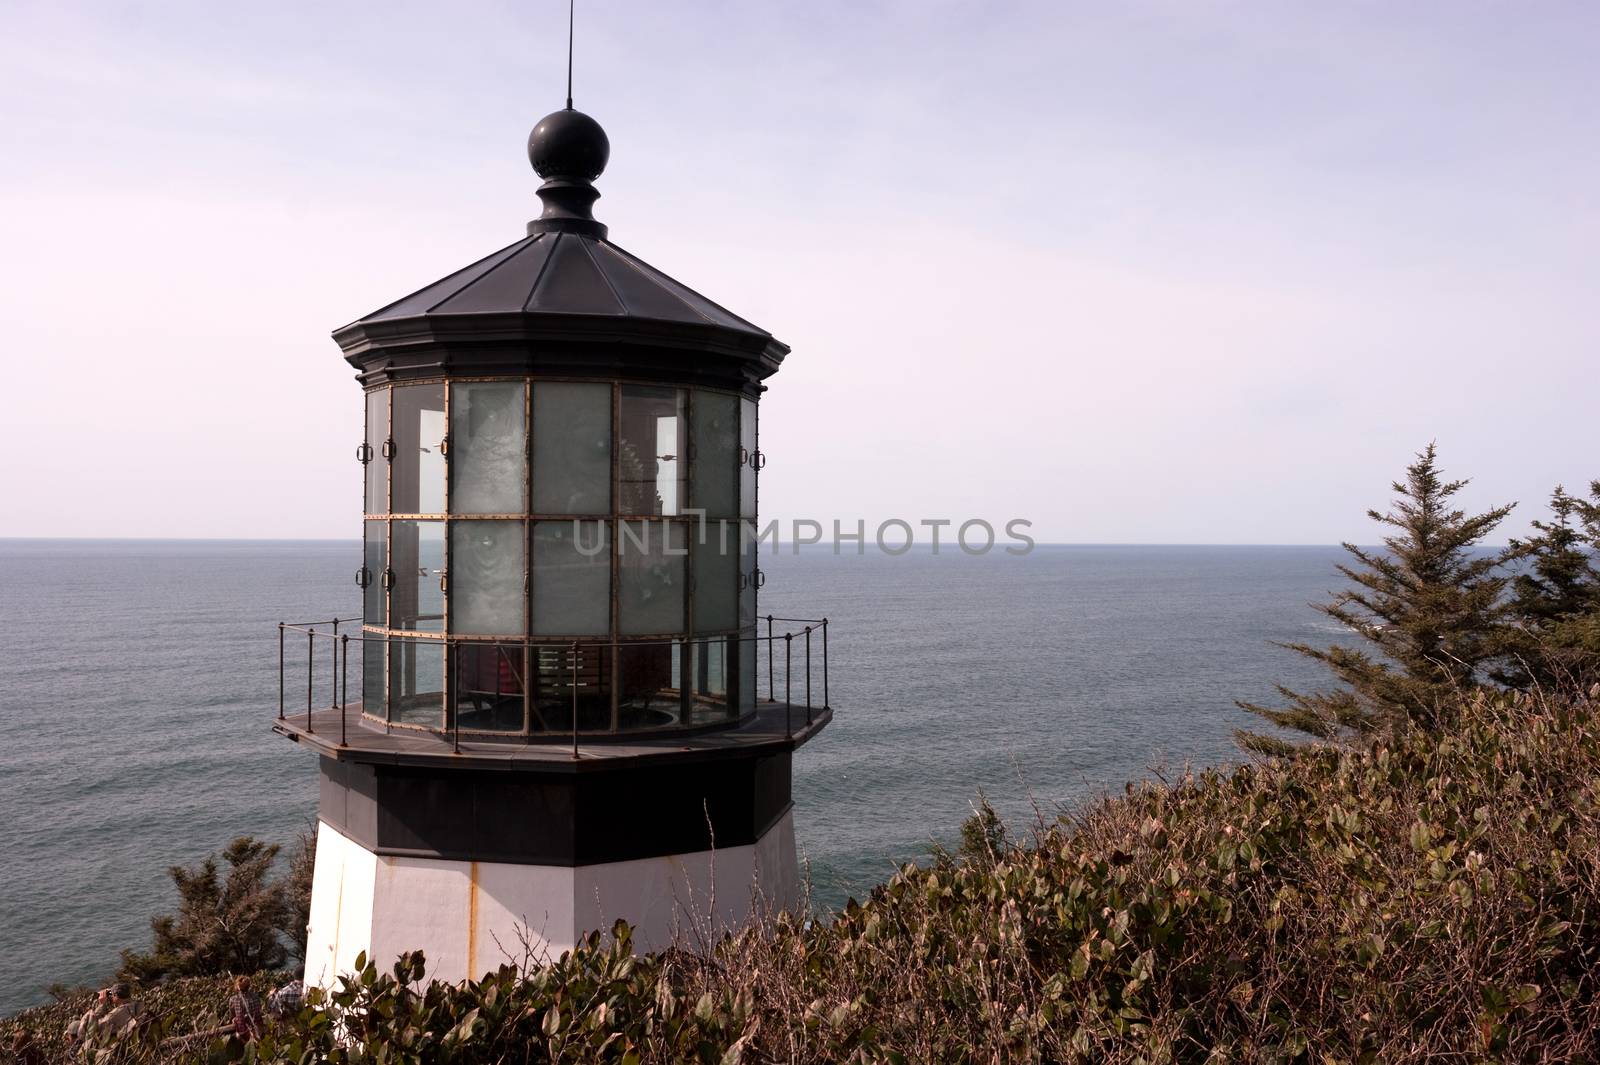 Cape Mears Lighthouse sits high on a bluff overlooking the Pacific Ocean